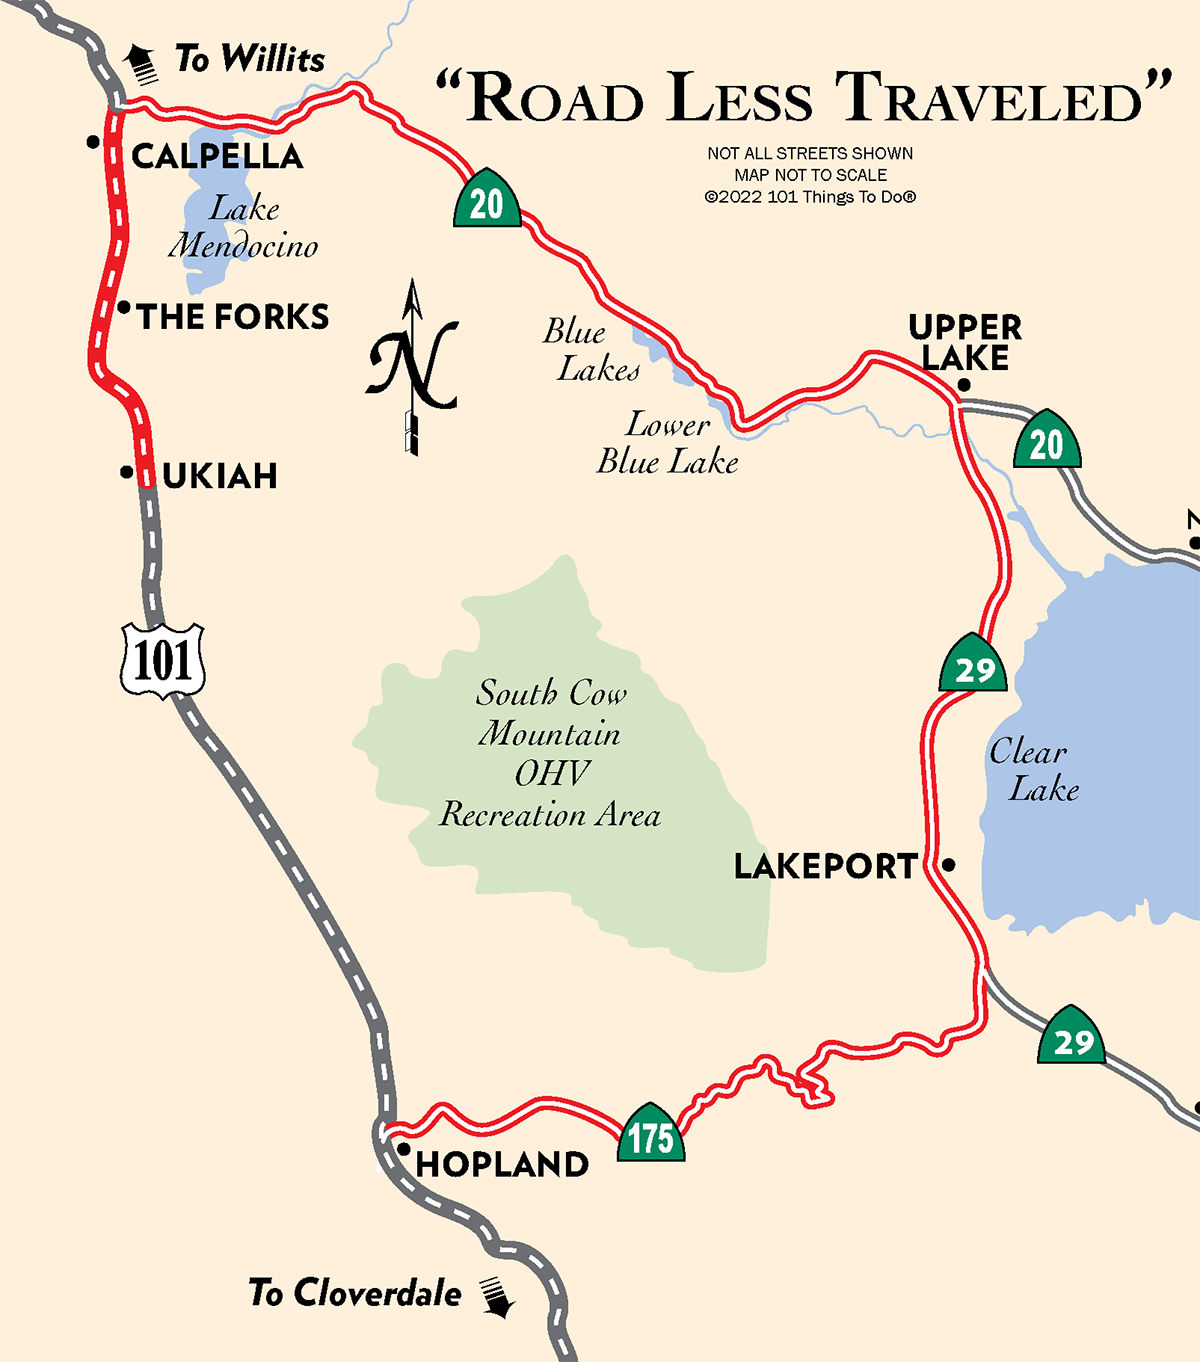 The “Road Less Traveled” from Hopland to Ukiah